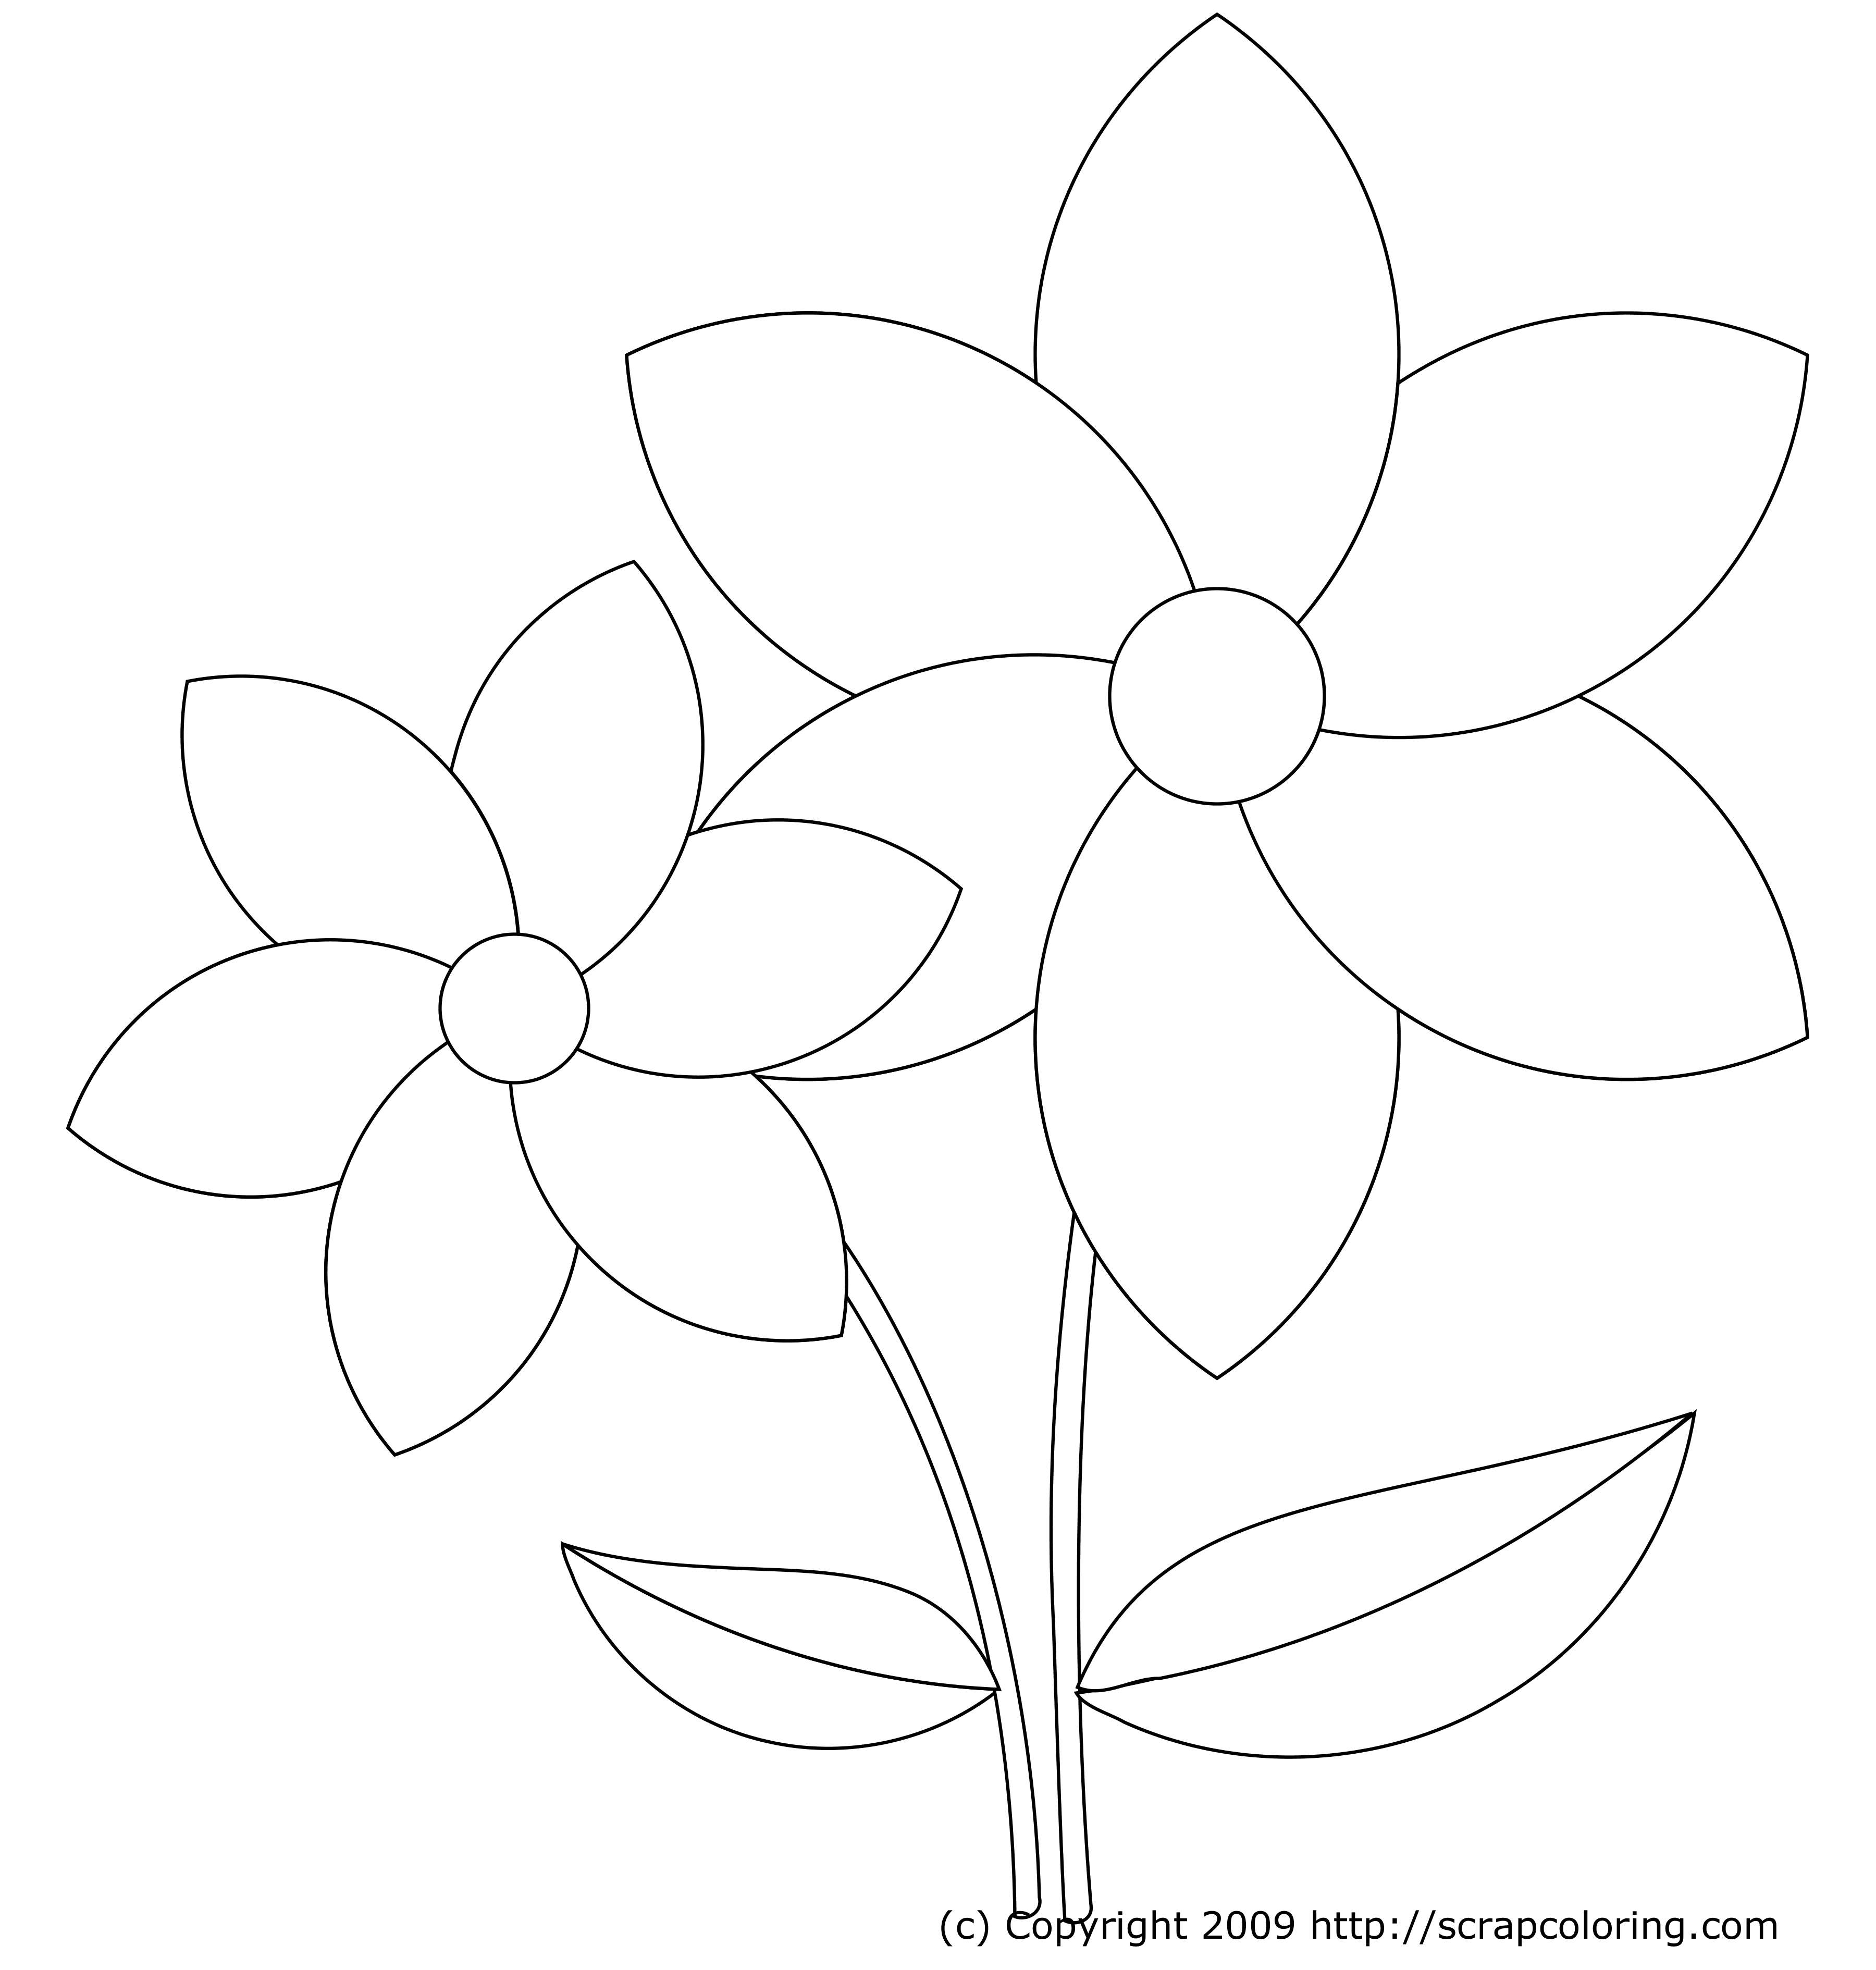 Flower Coloring Pages Printable For S - High Quality Coloring Pages